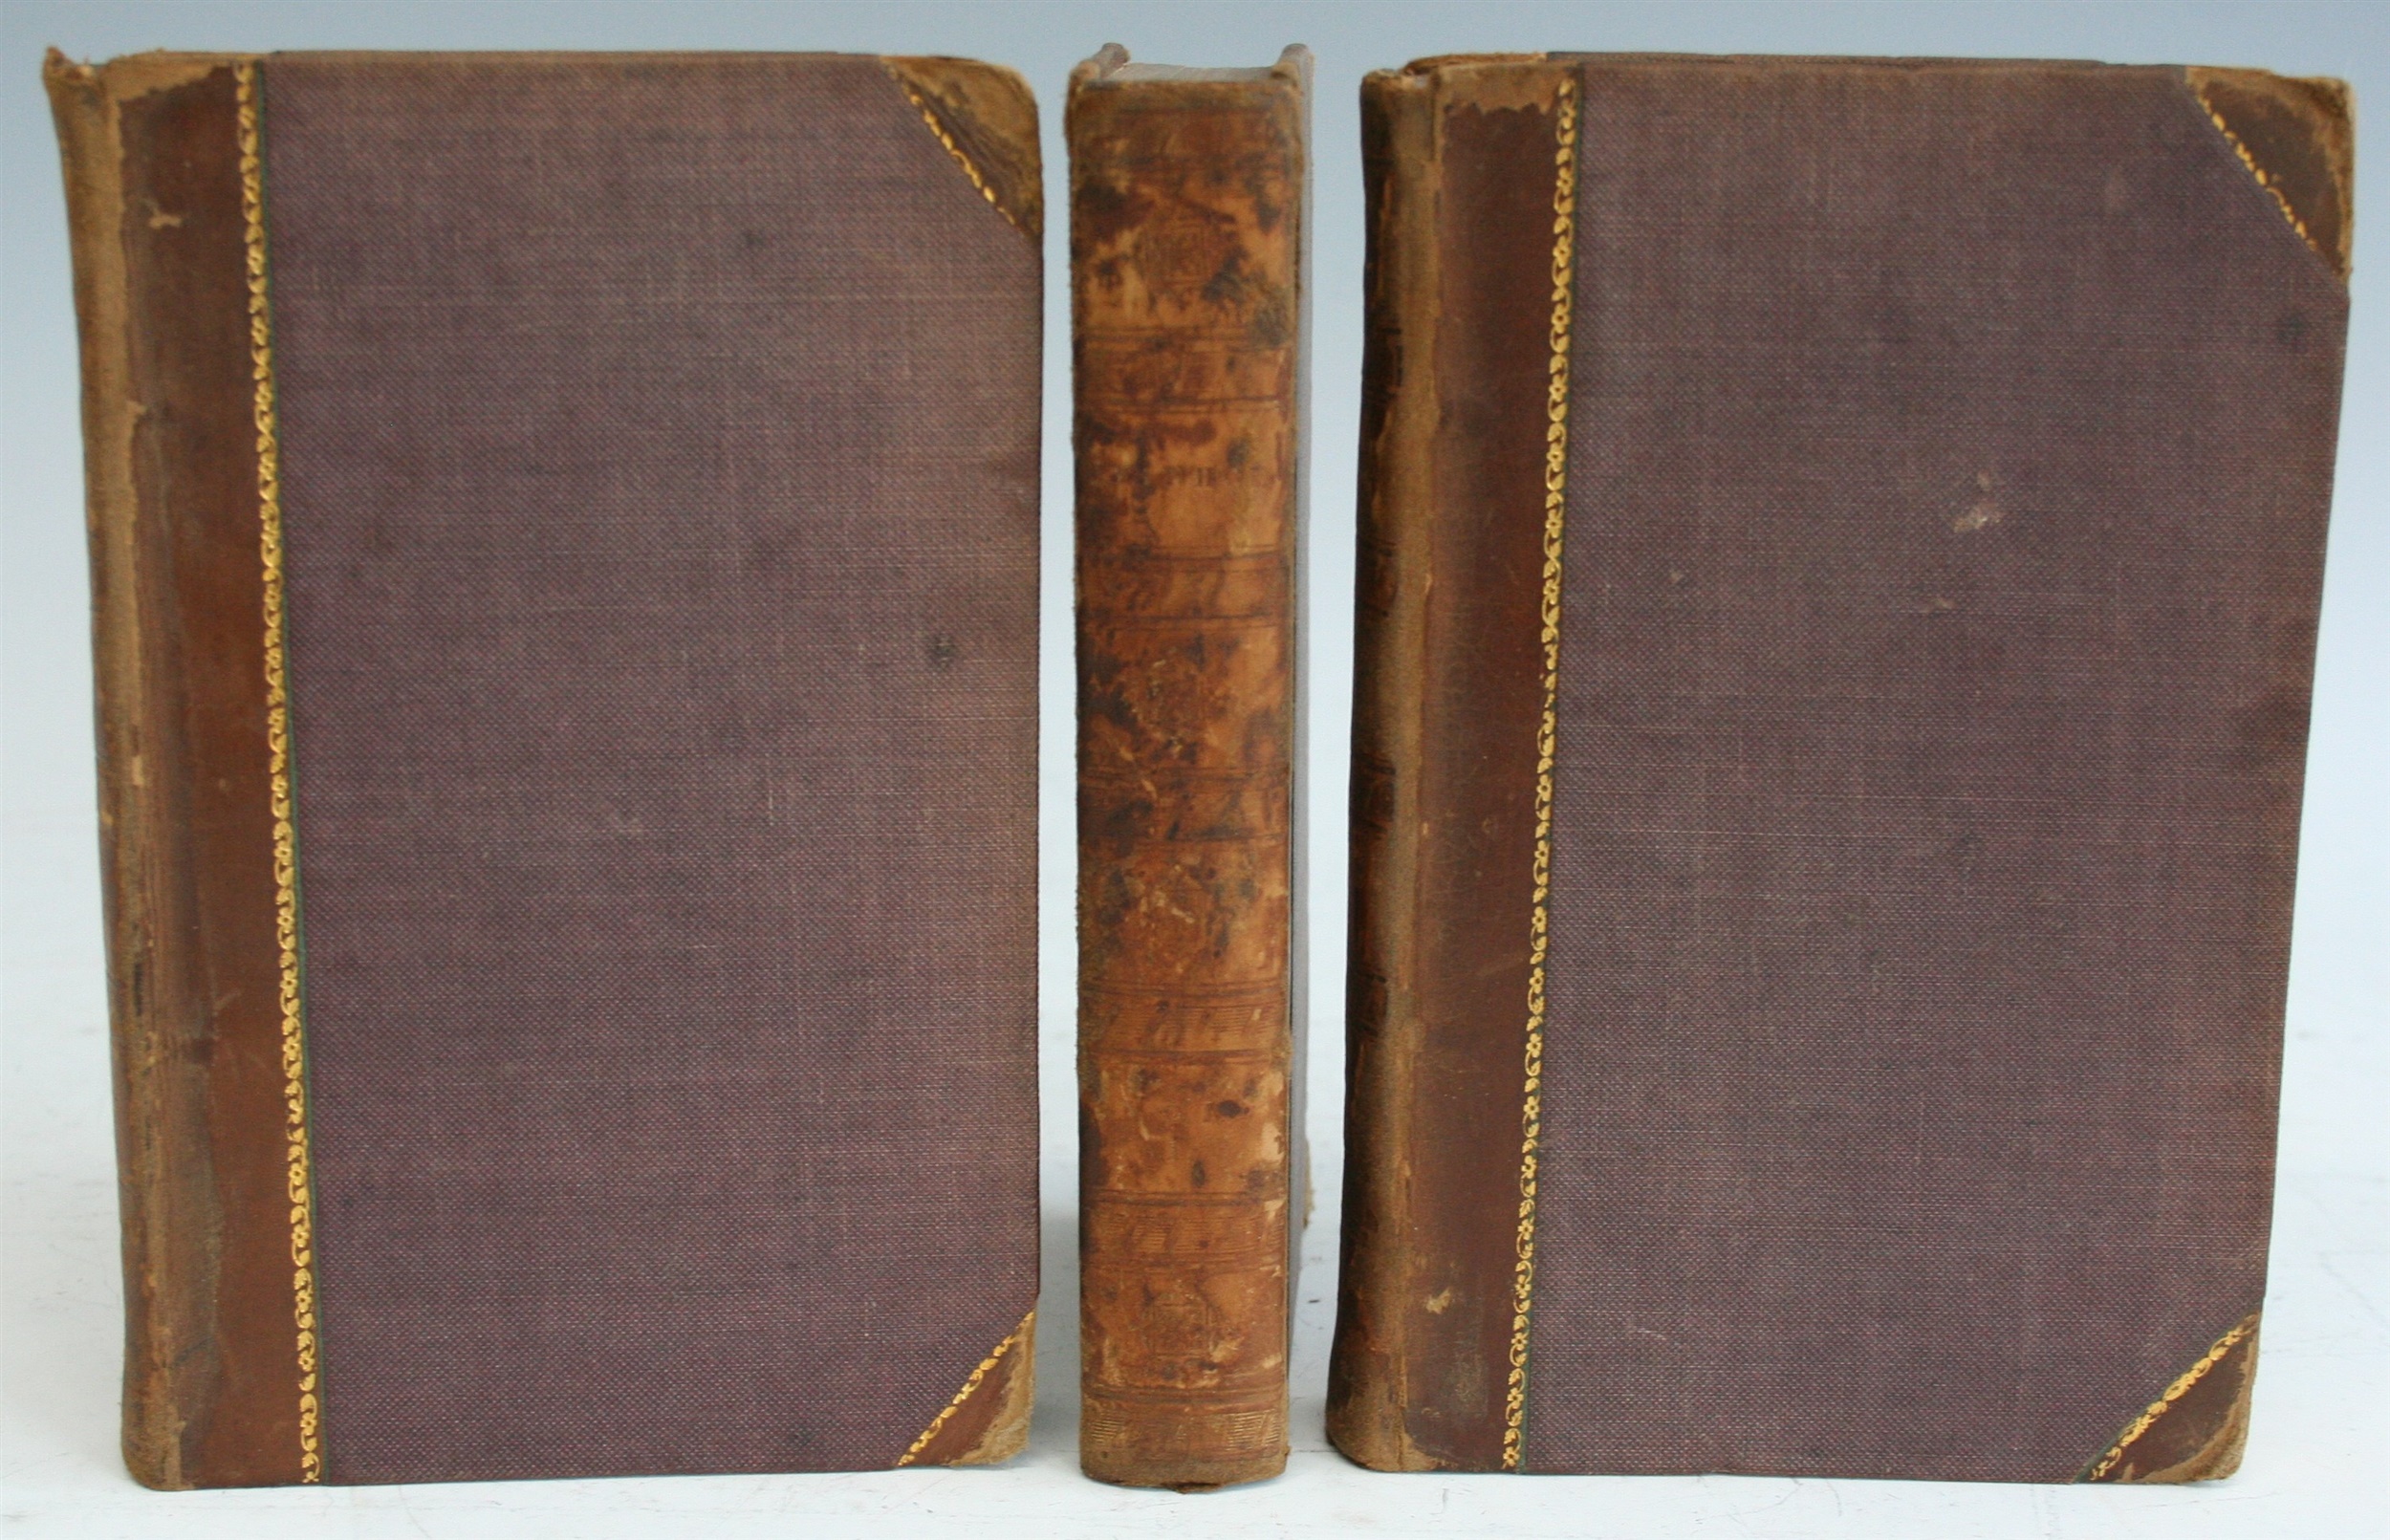 SCOTT, Walter, Ivanhoe. Archibald Constable & Co, Edinburgh. 1820 1 st edition in 3 volumes. This is - Image 2 of 3